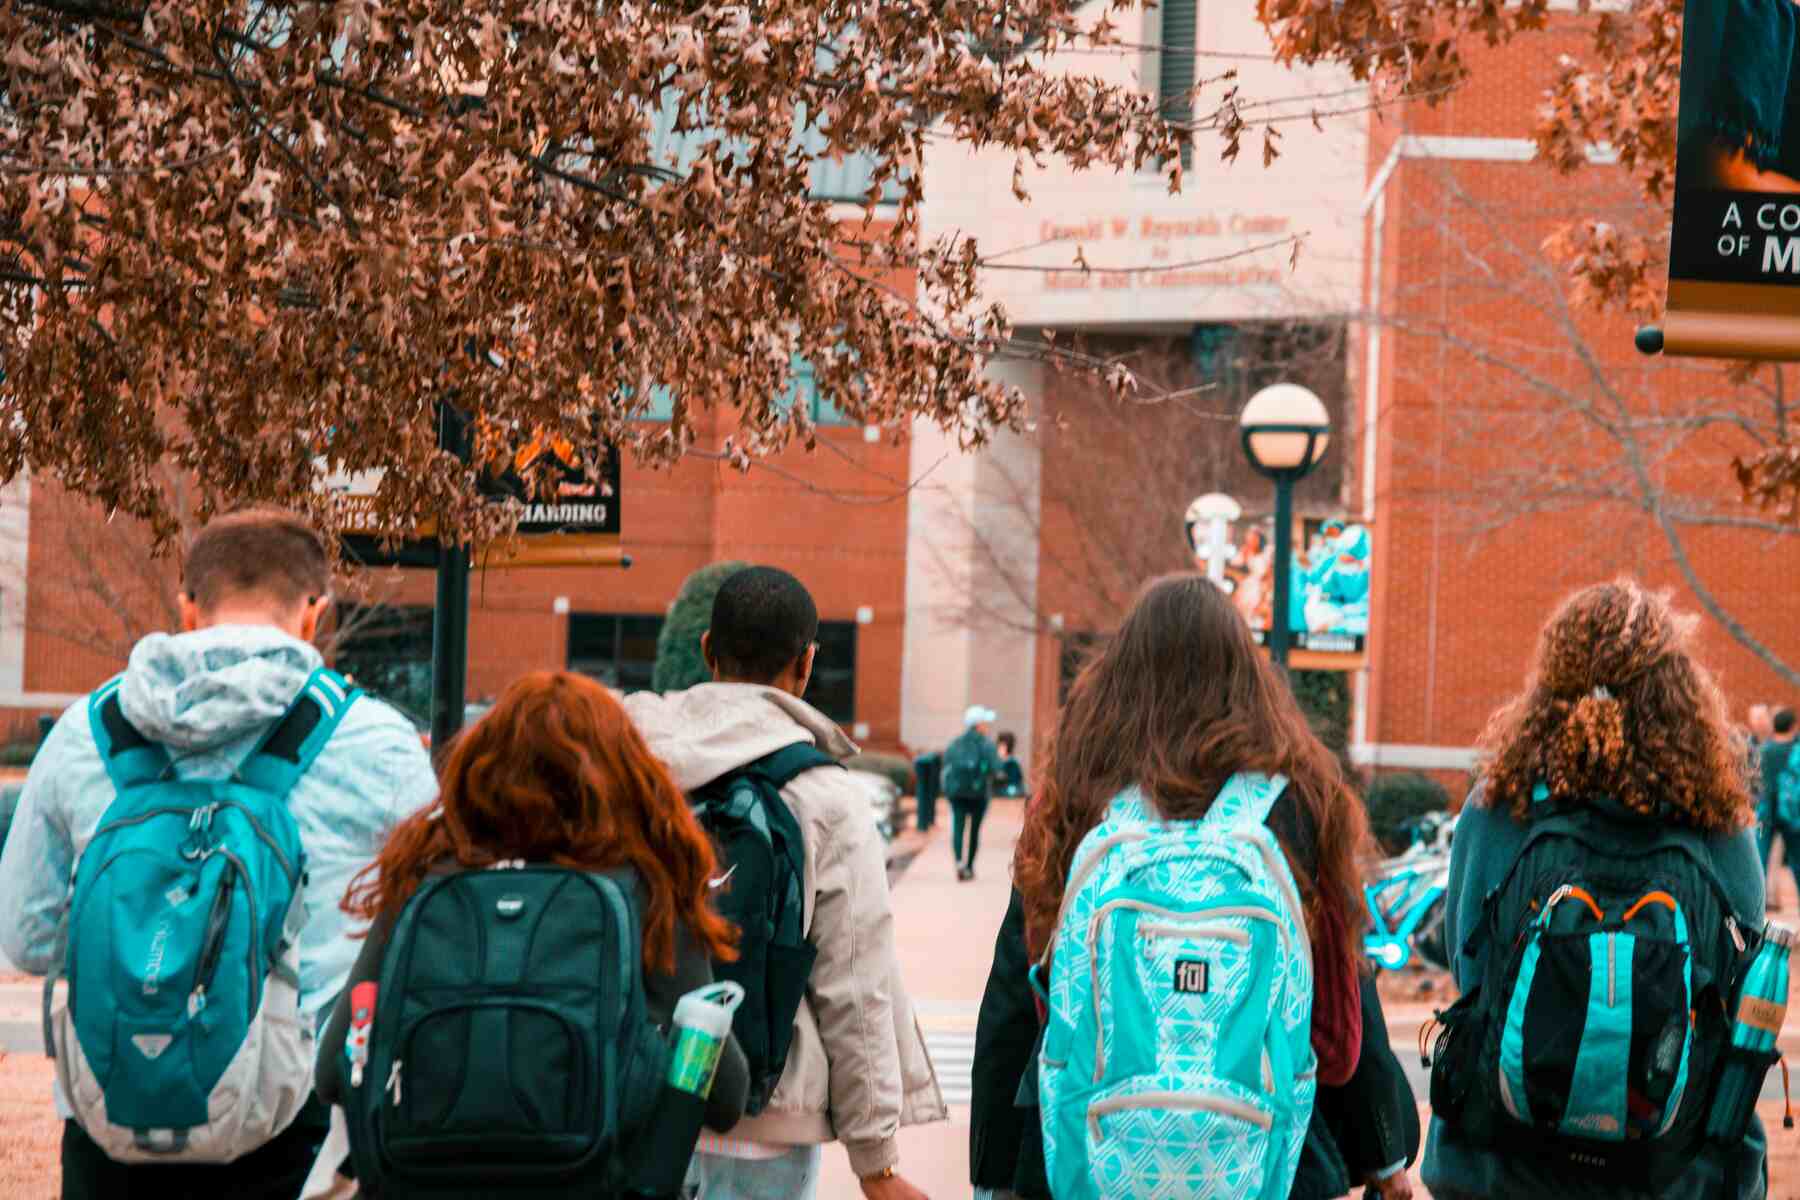 Students wearing backpacks walking around on a campus